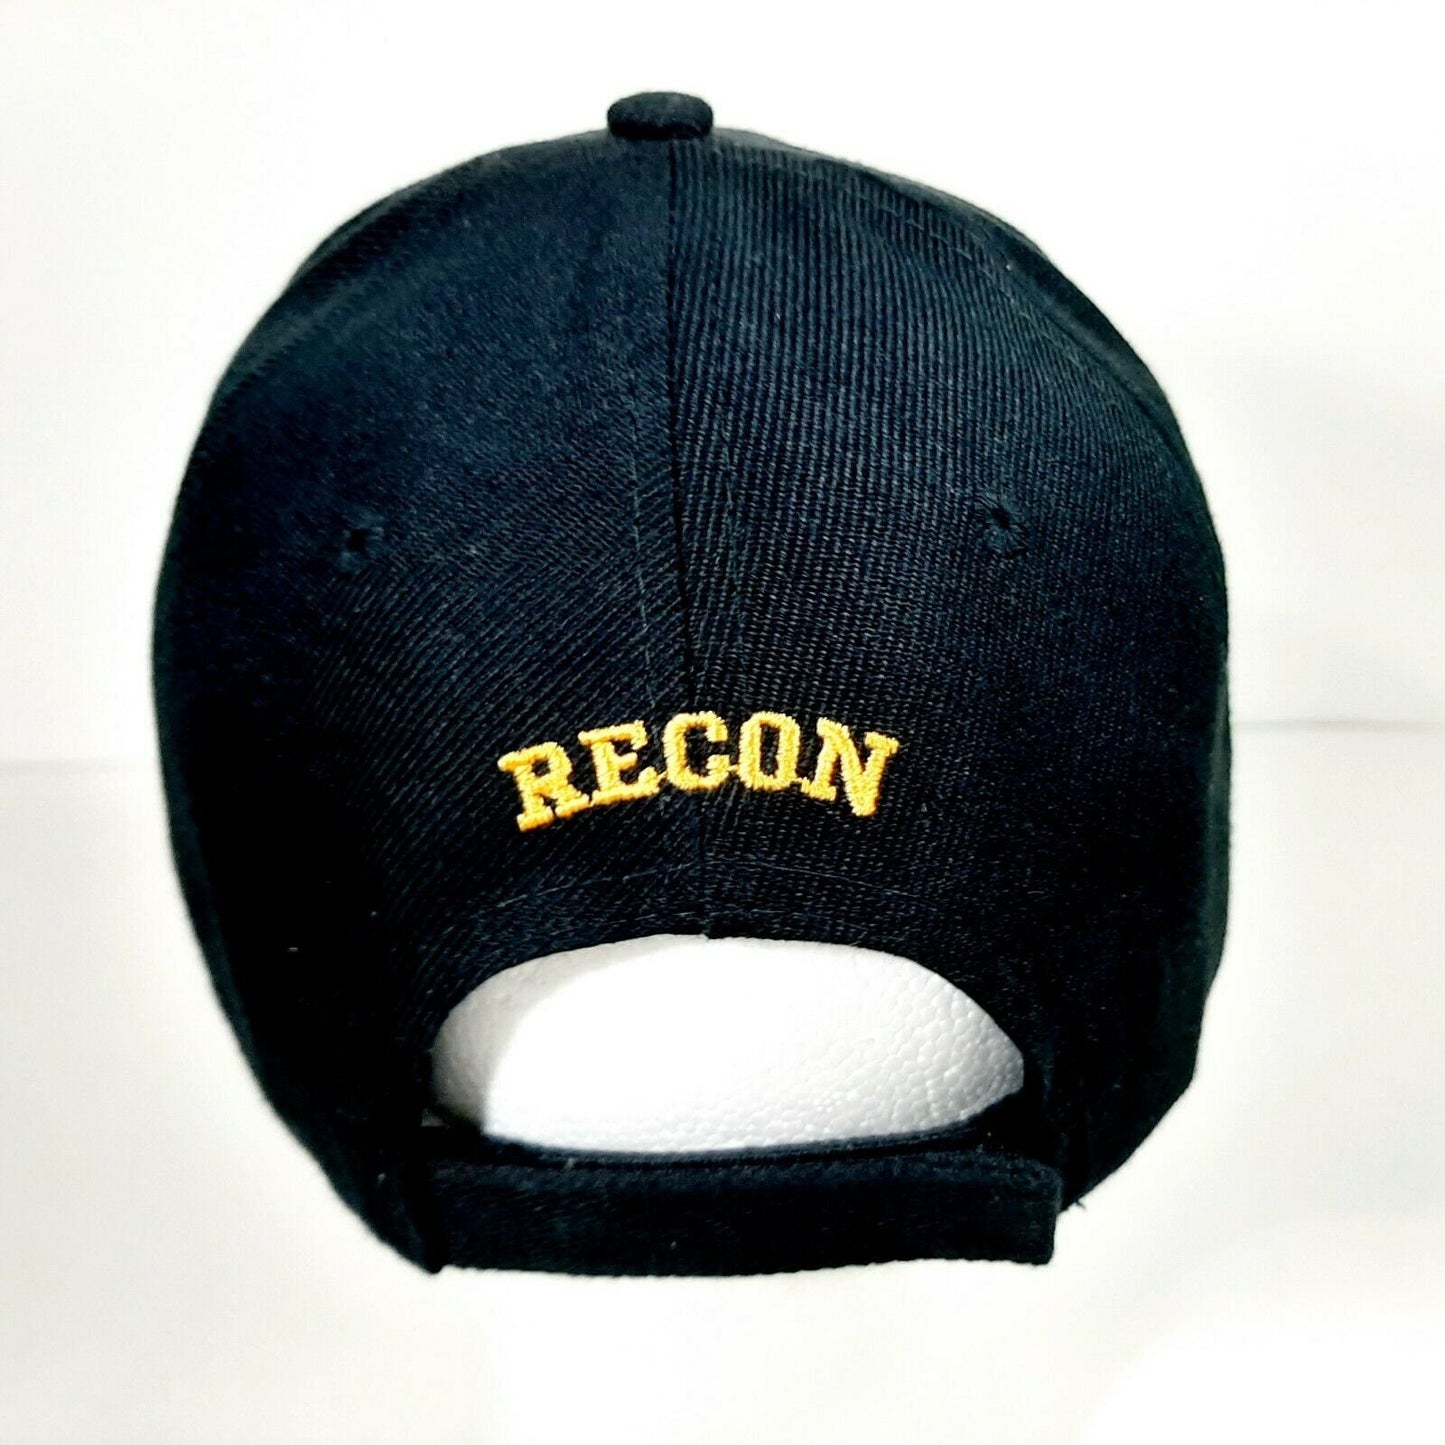 US Army 1st Recon Men's Ball Cap Hat Black Embroidered Acrylic